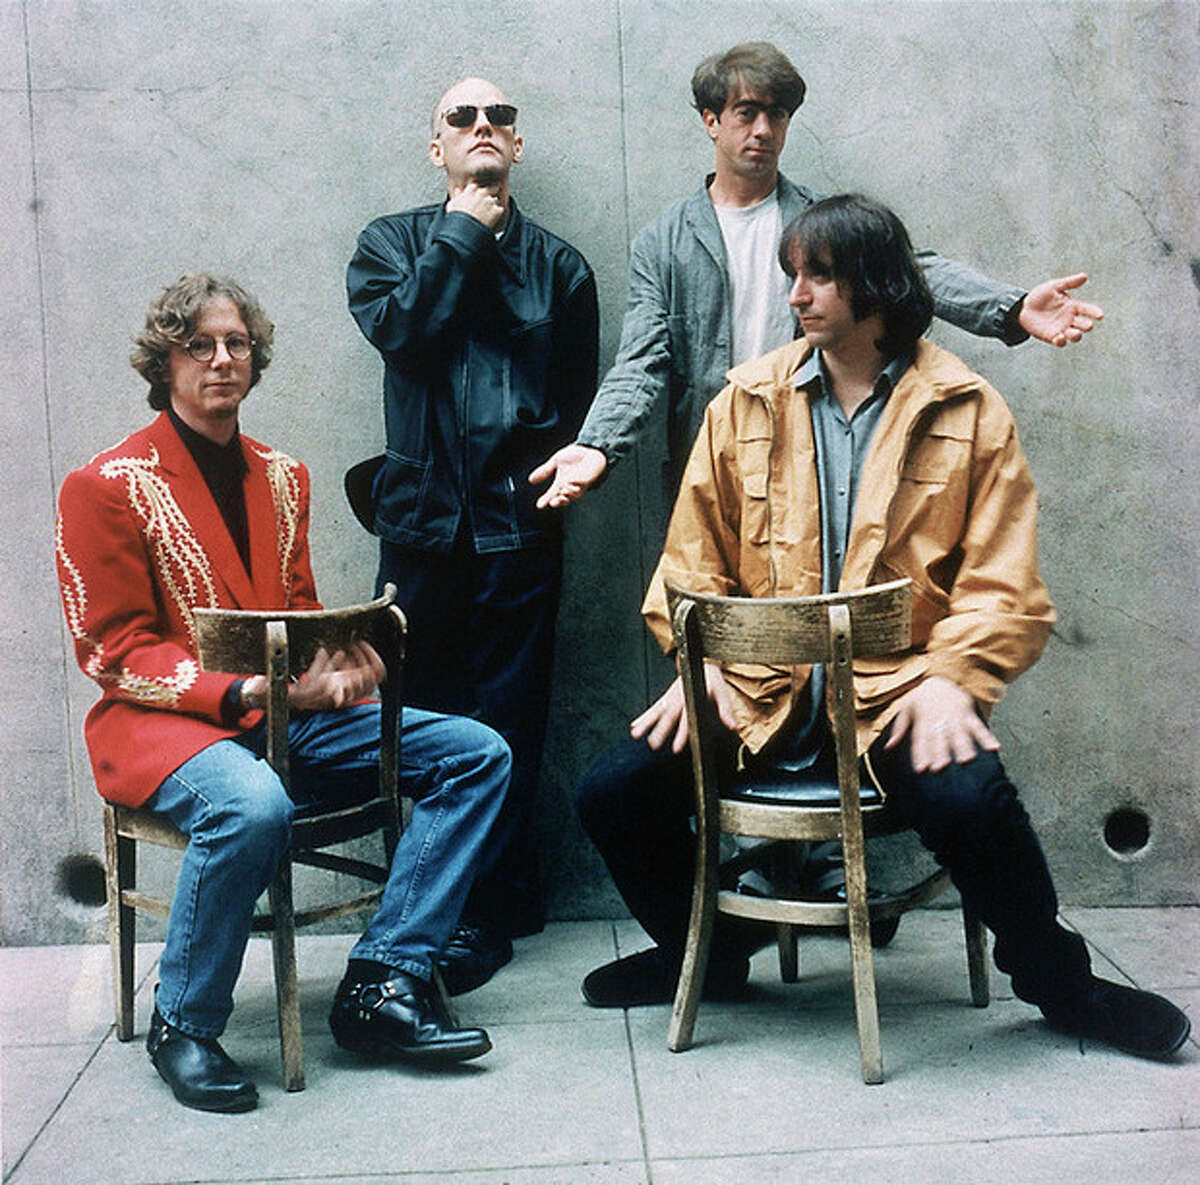 AP photo / Warner Bros. In this 1994 file photo, rock band R.E.M., from left, Mike Mills, Michael Stipe, Bill Berry, and Peter Buck, are shown when they released their new album "Monster." The band announced Wednesday that they are breaking up.